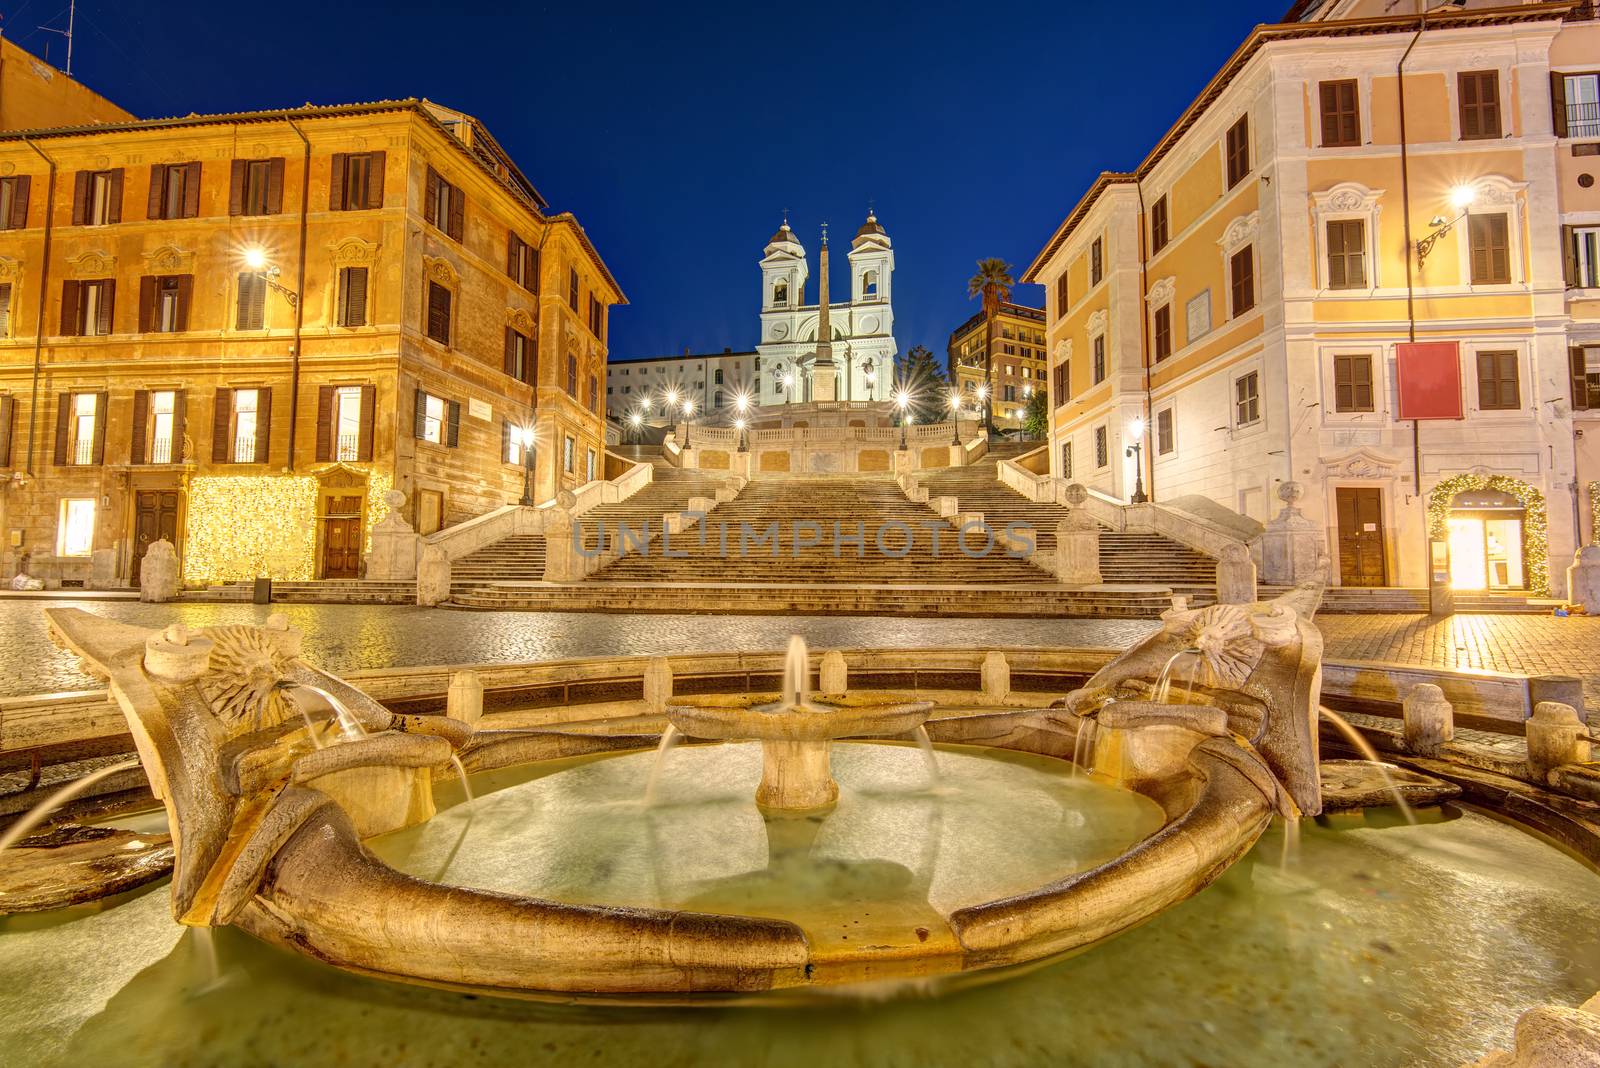 The famous Spanish Steps in Rome by elxeneize